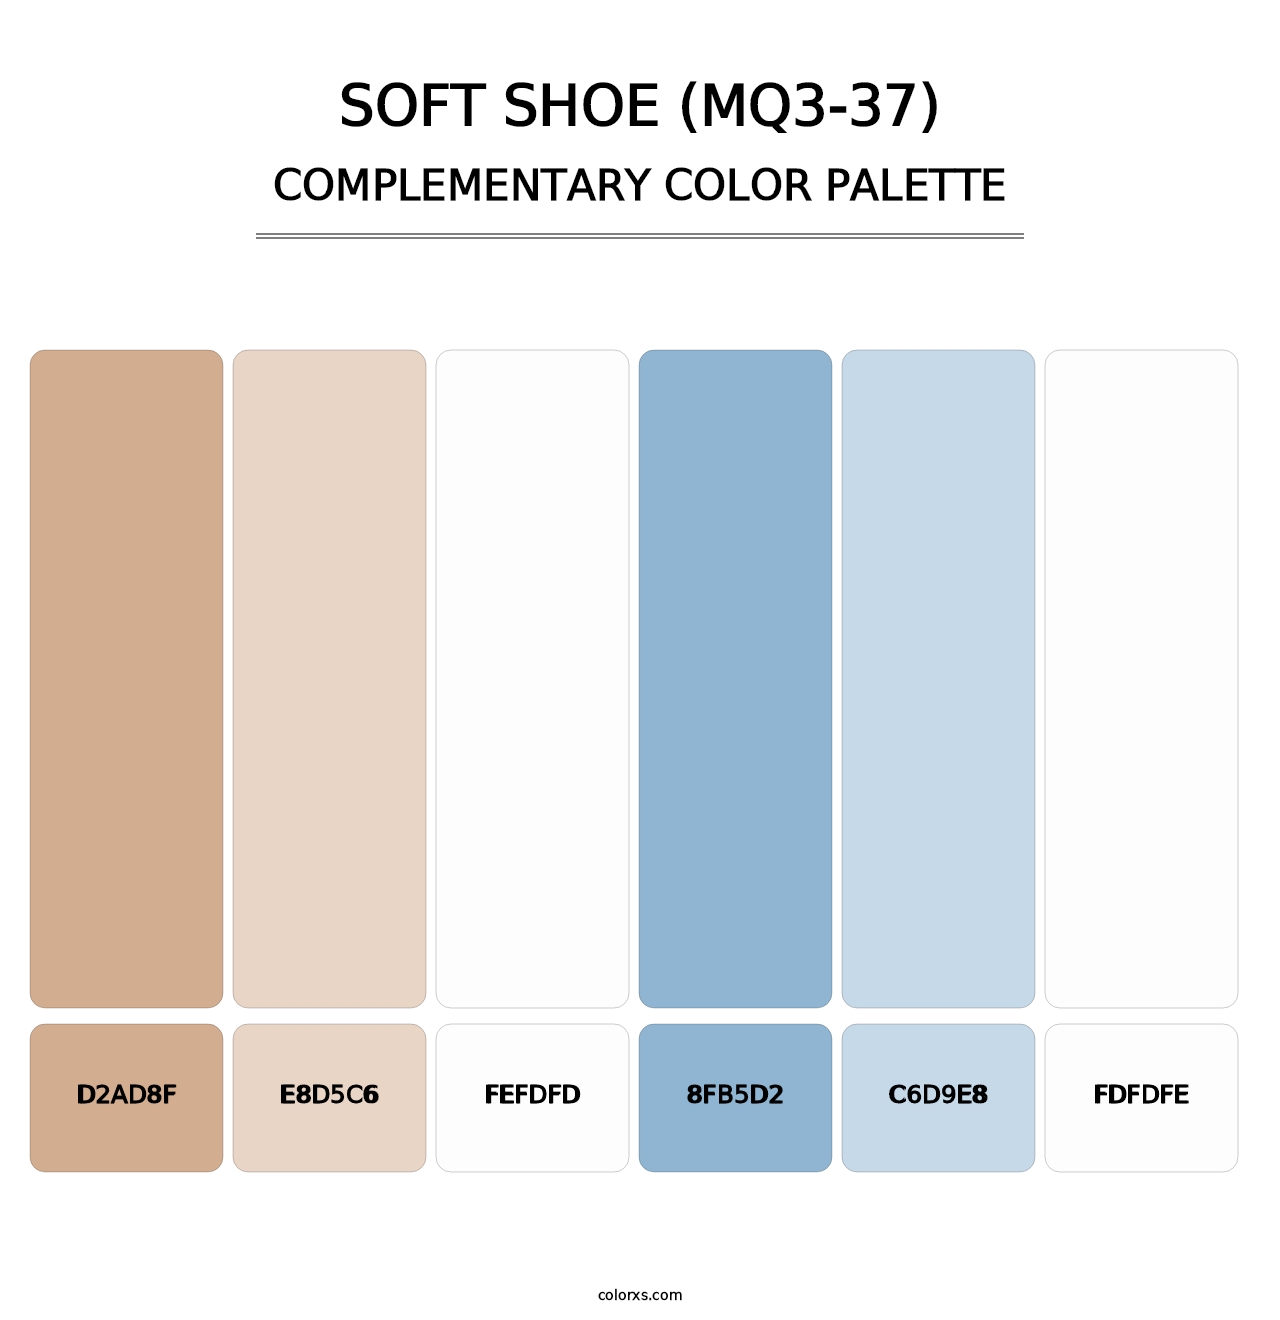 Soft Shoe (MQ3-37) - Complementary Color Palette